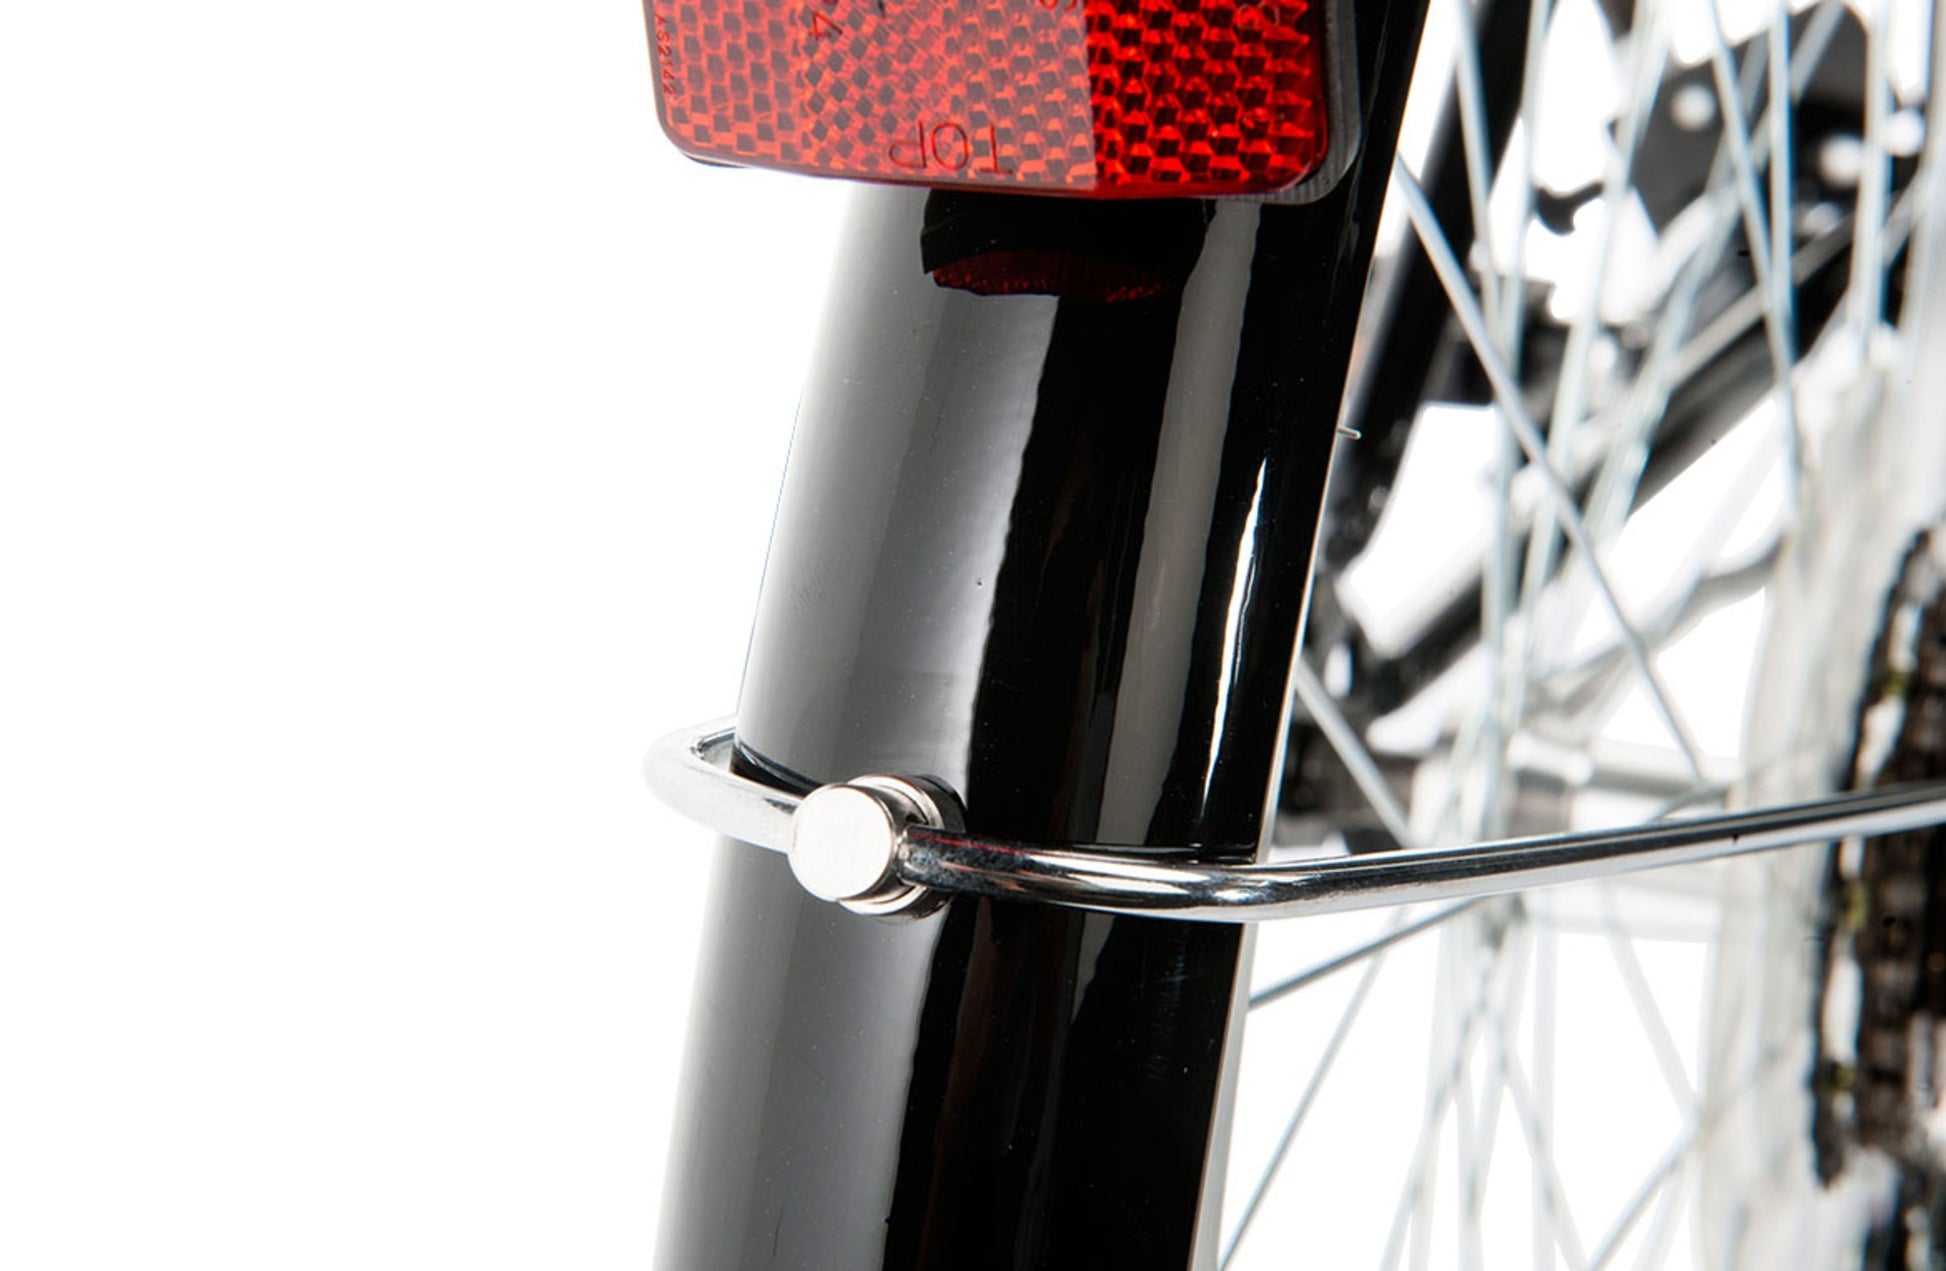 Ladies Classic Plus Vintage Bike in Black showing rear mudguard with red reflector from Reid Cycles Australia